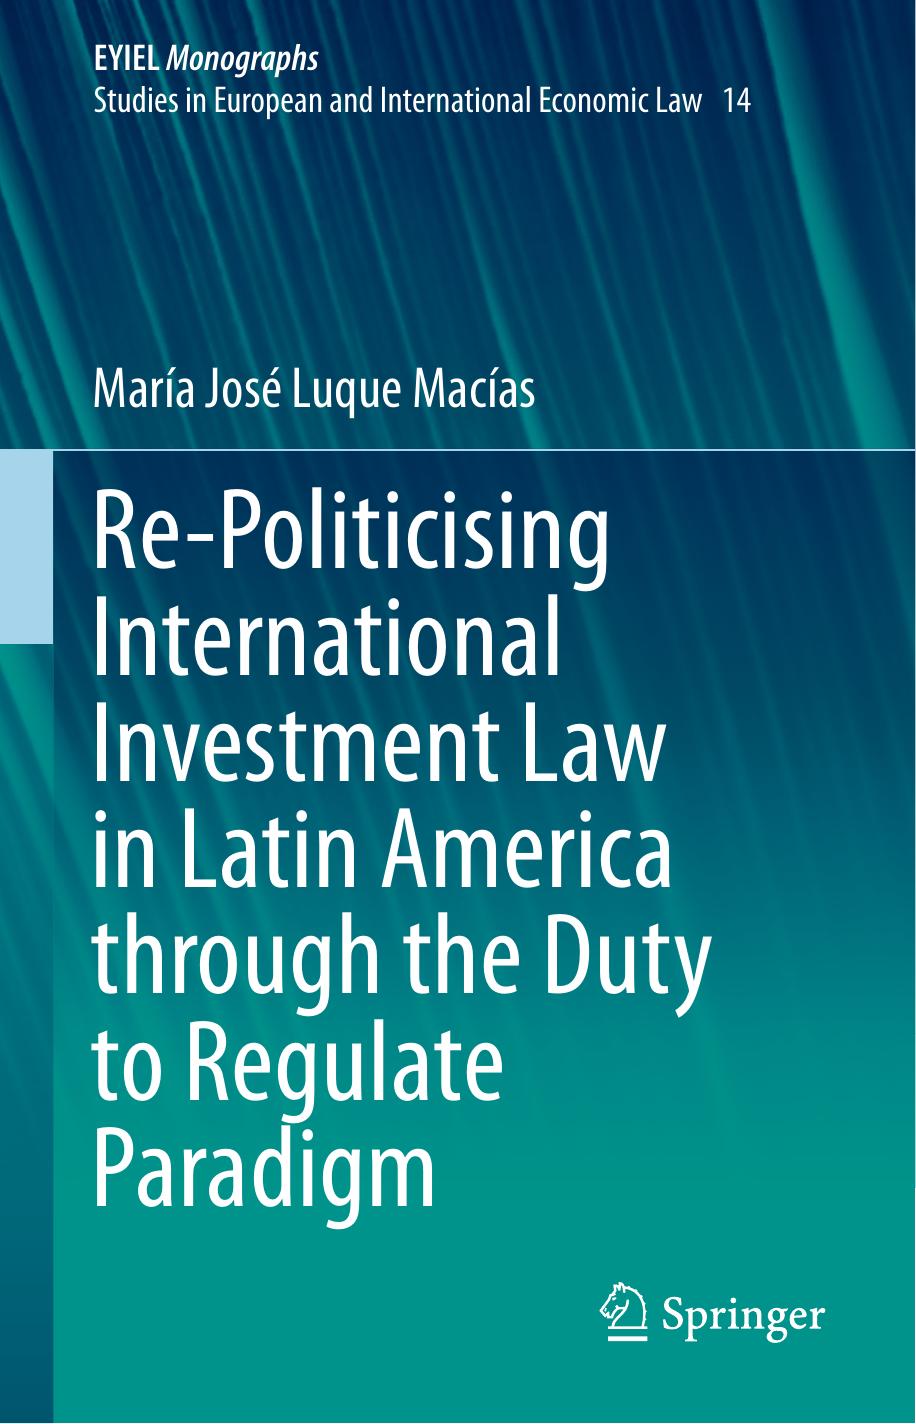 Re-Politicising International Investment Law in Latin America through the Duty to Regulate Paradigm by María José Luque Macías